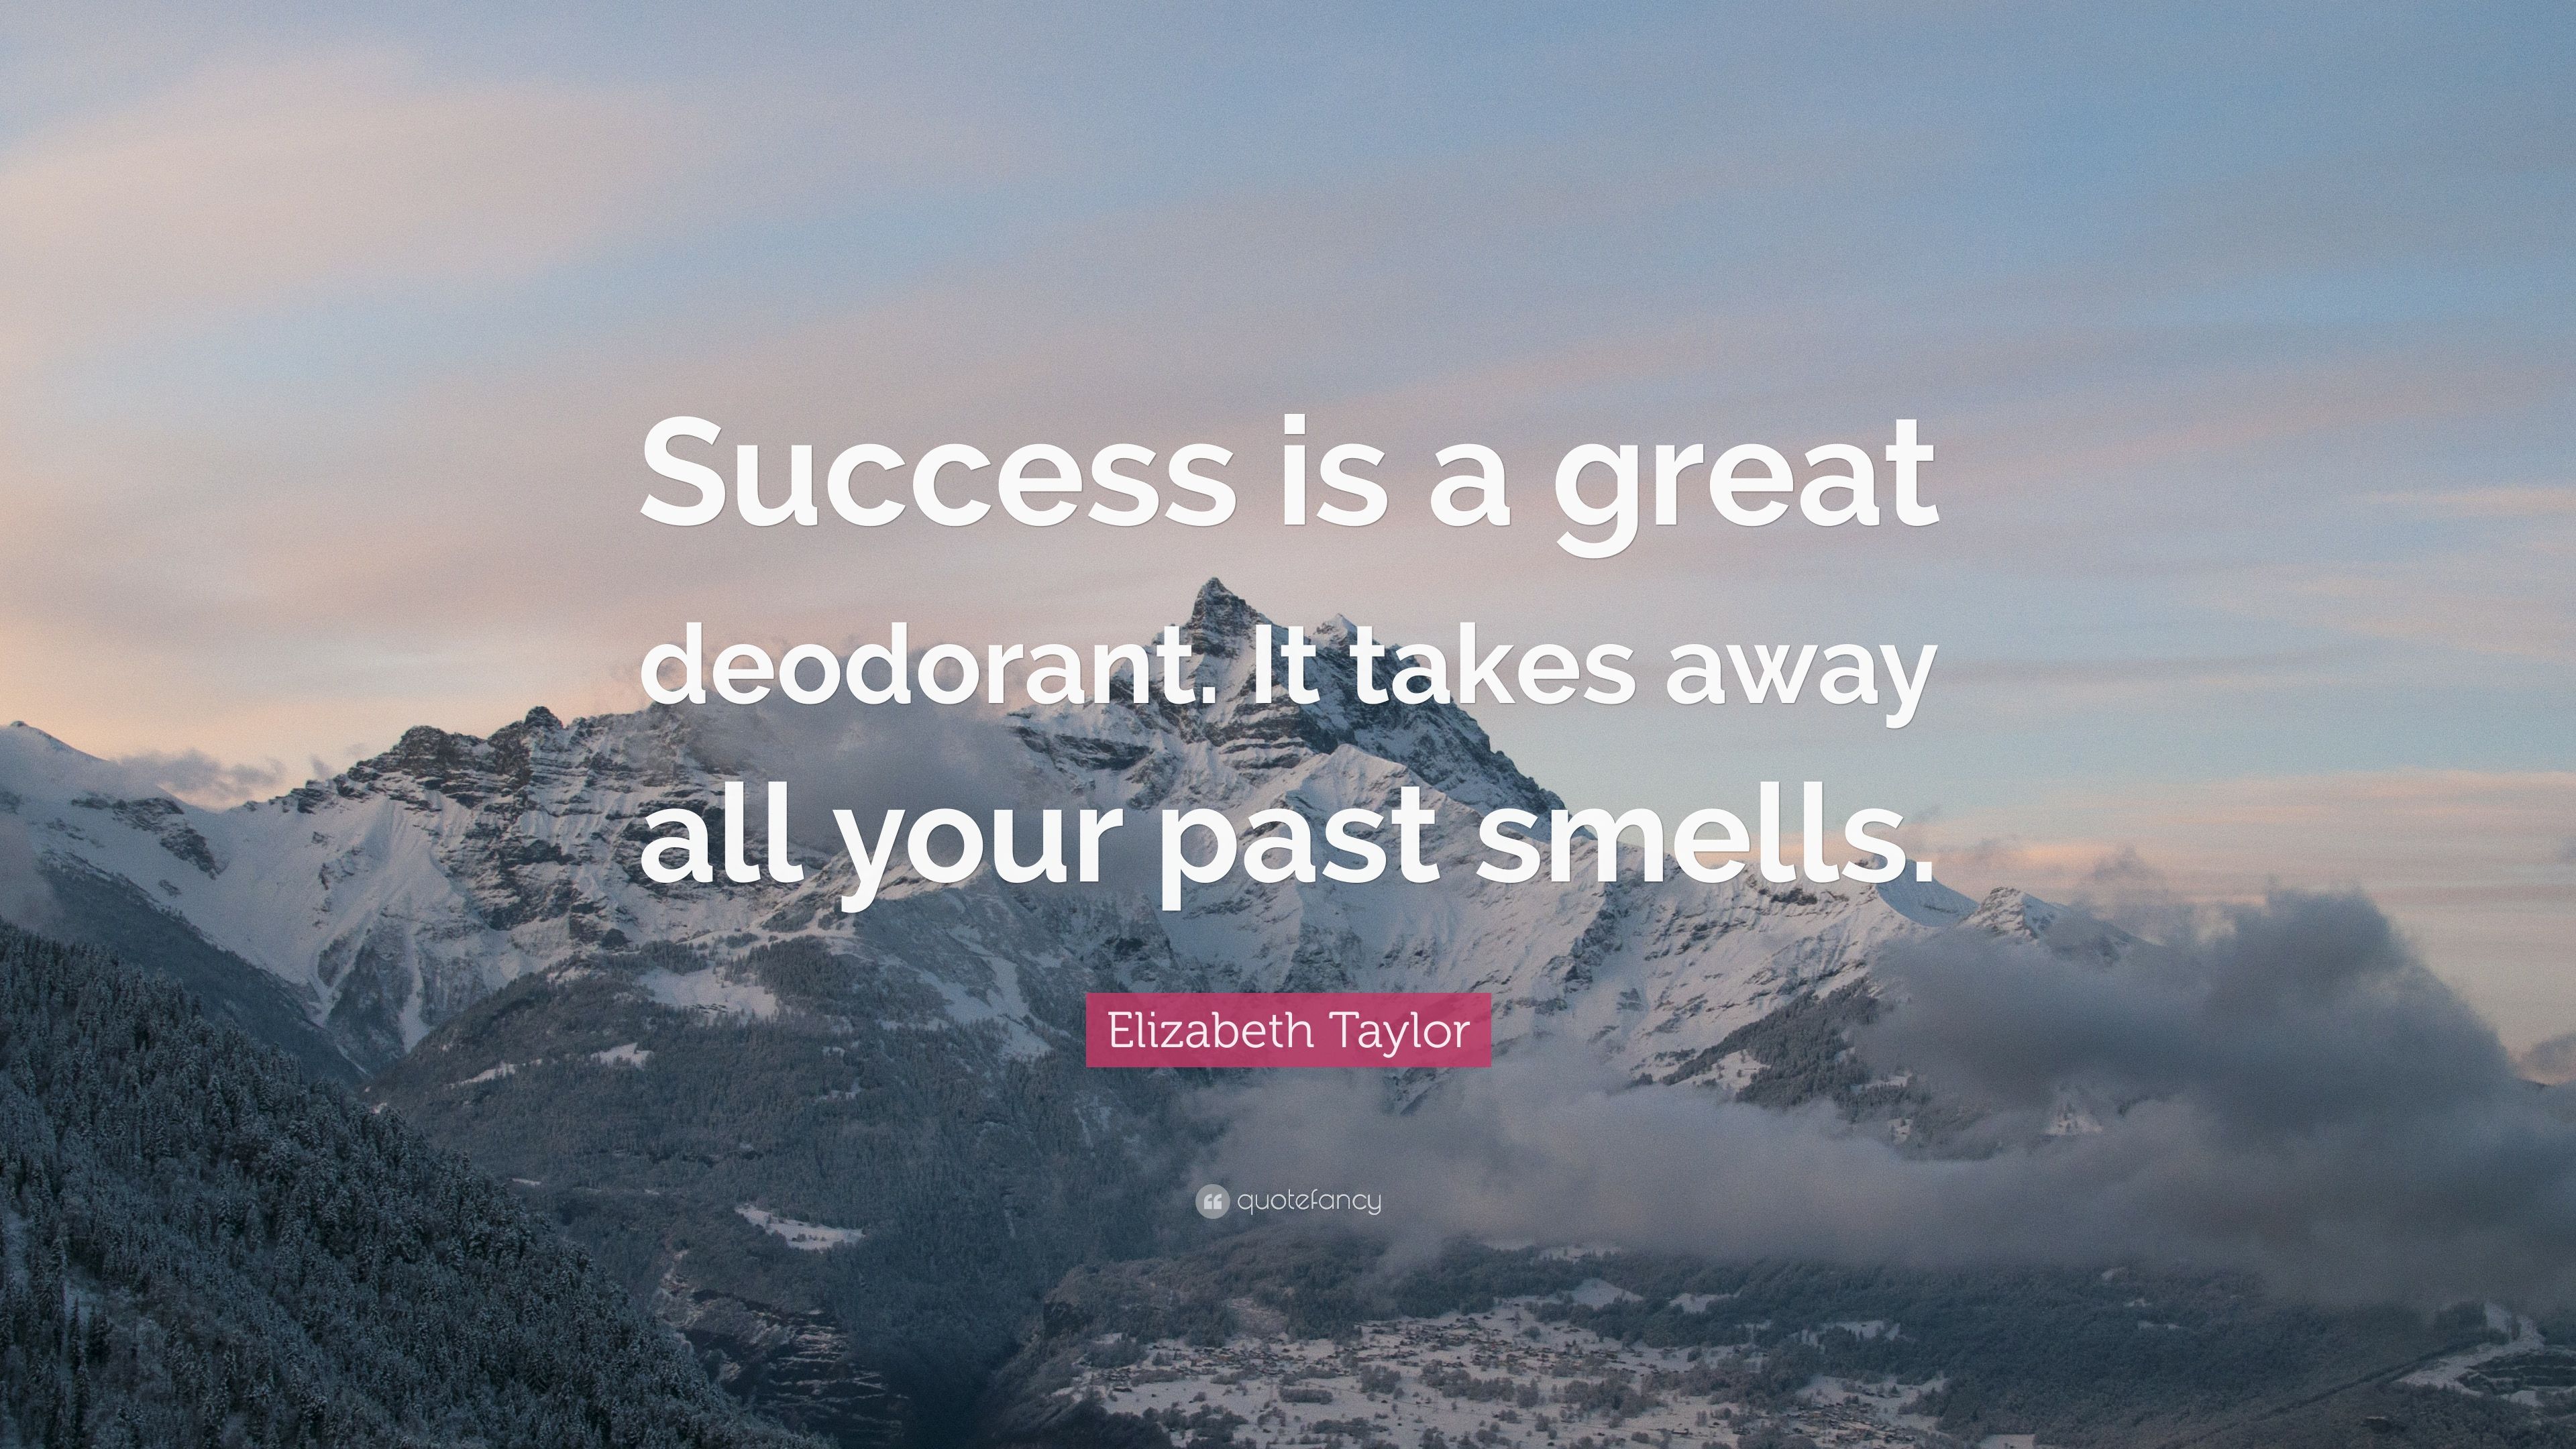 Elizabeth Taylor Quote: “Success is a great deodorant. It takes away